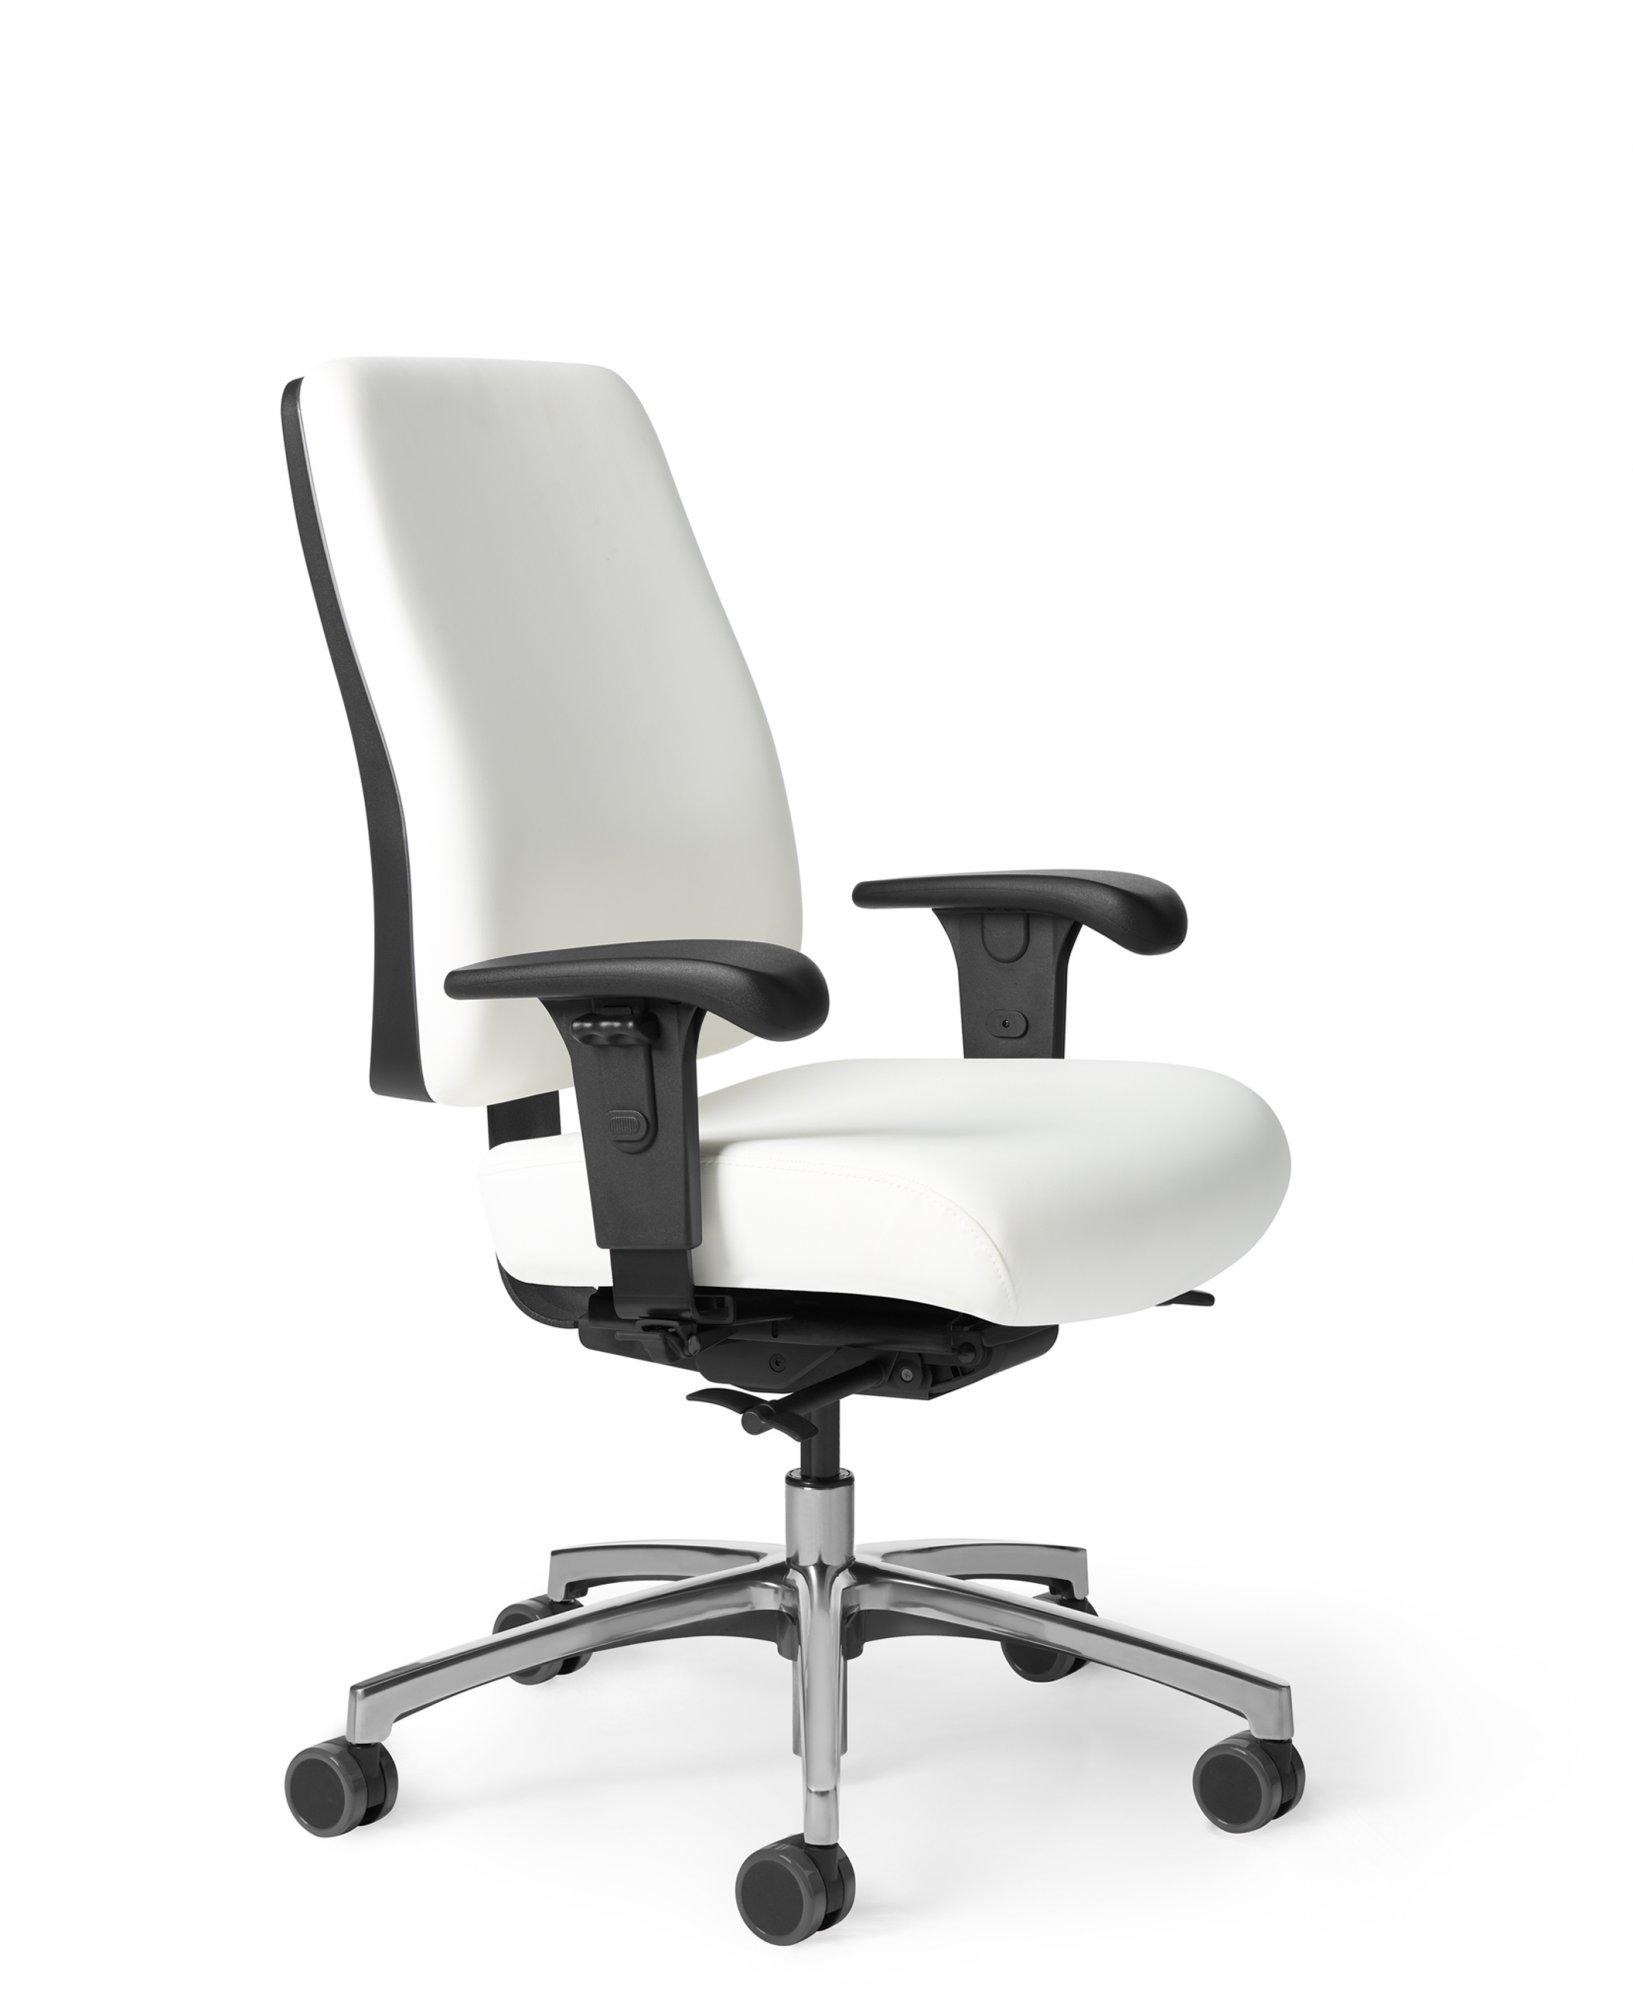 Front View - Office Master AF468 Affirm Chair